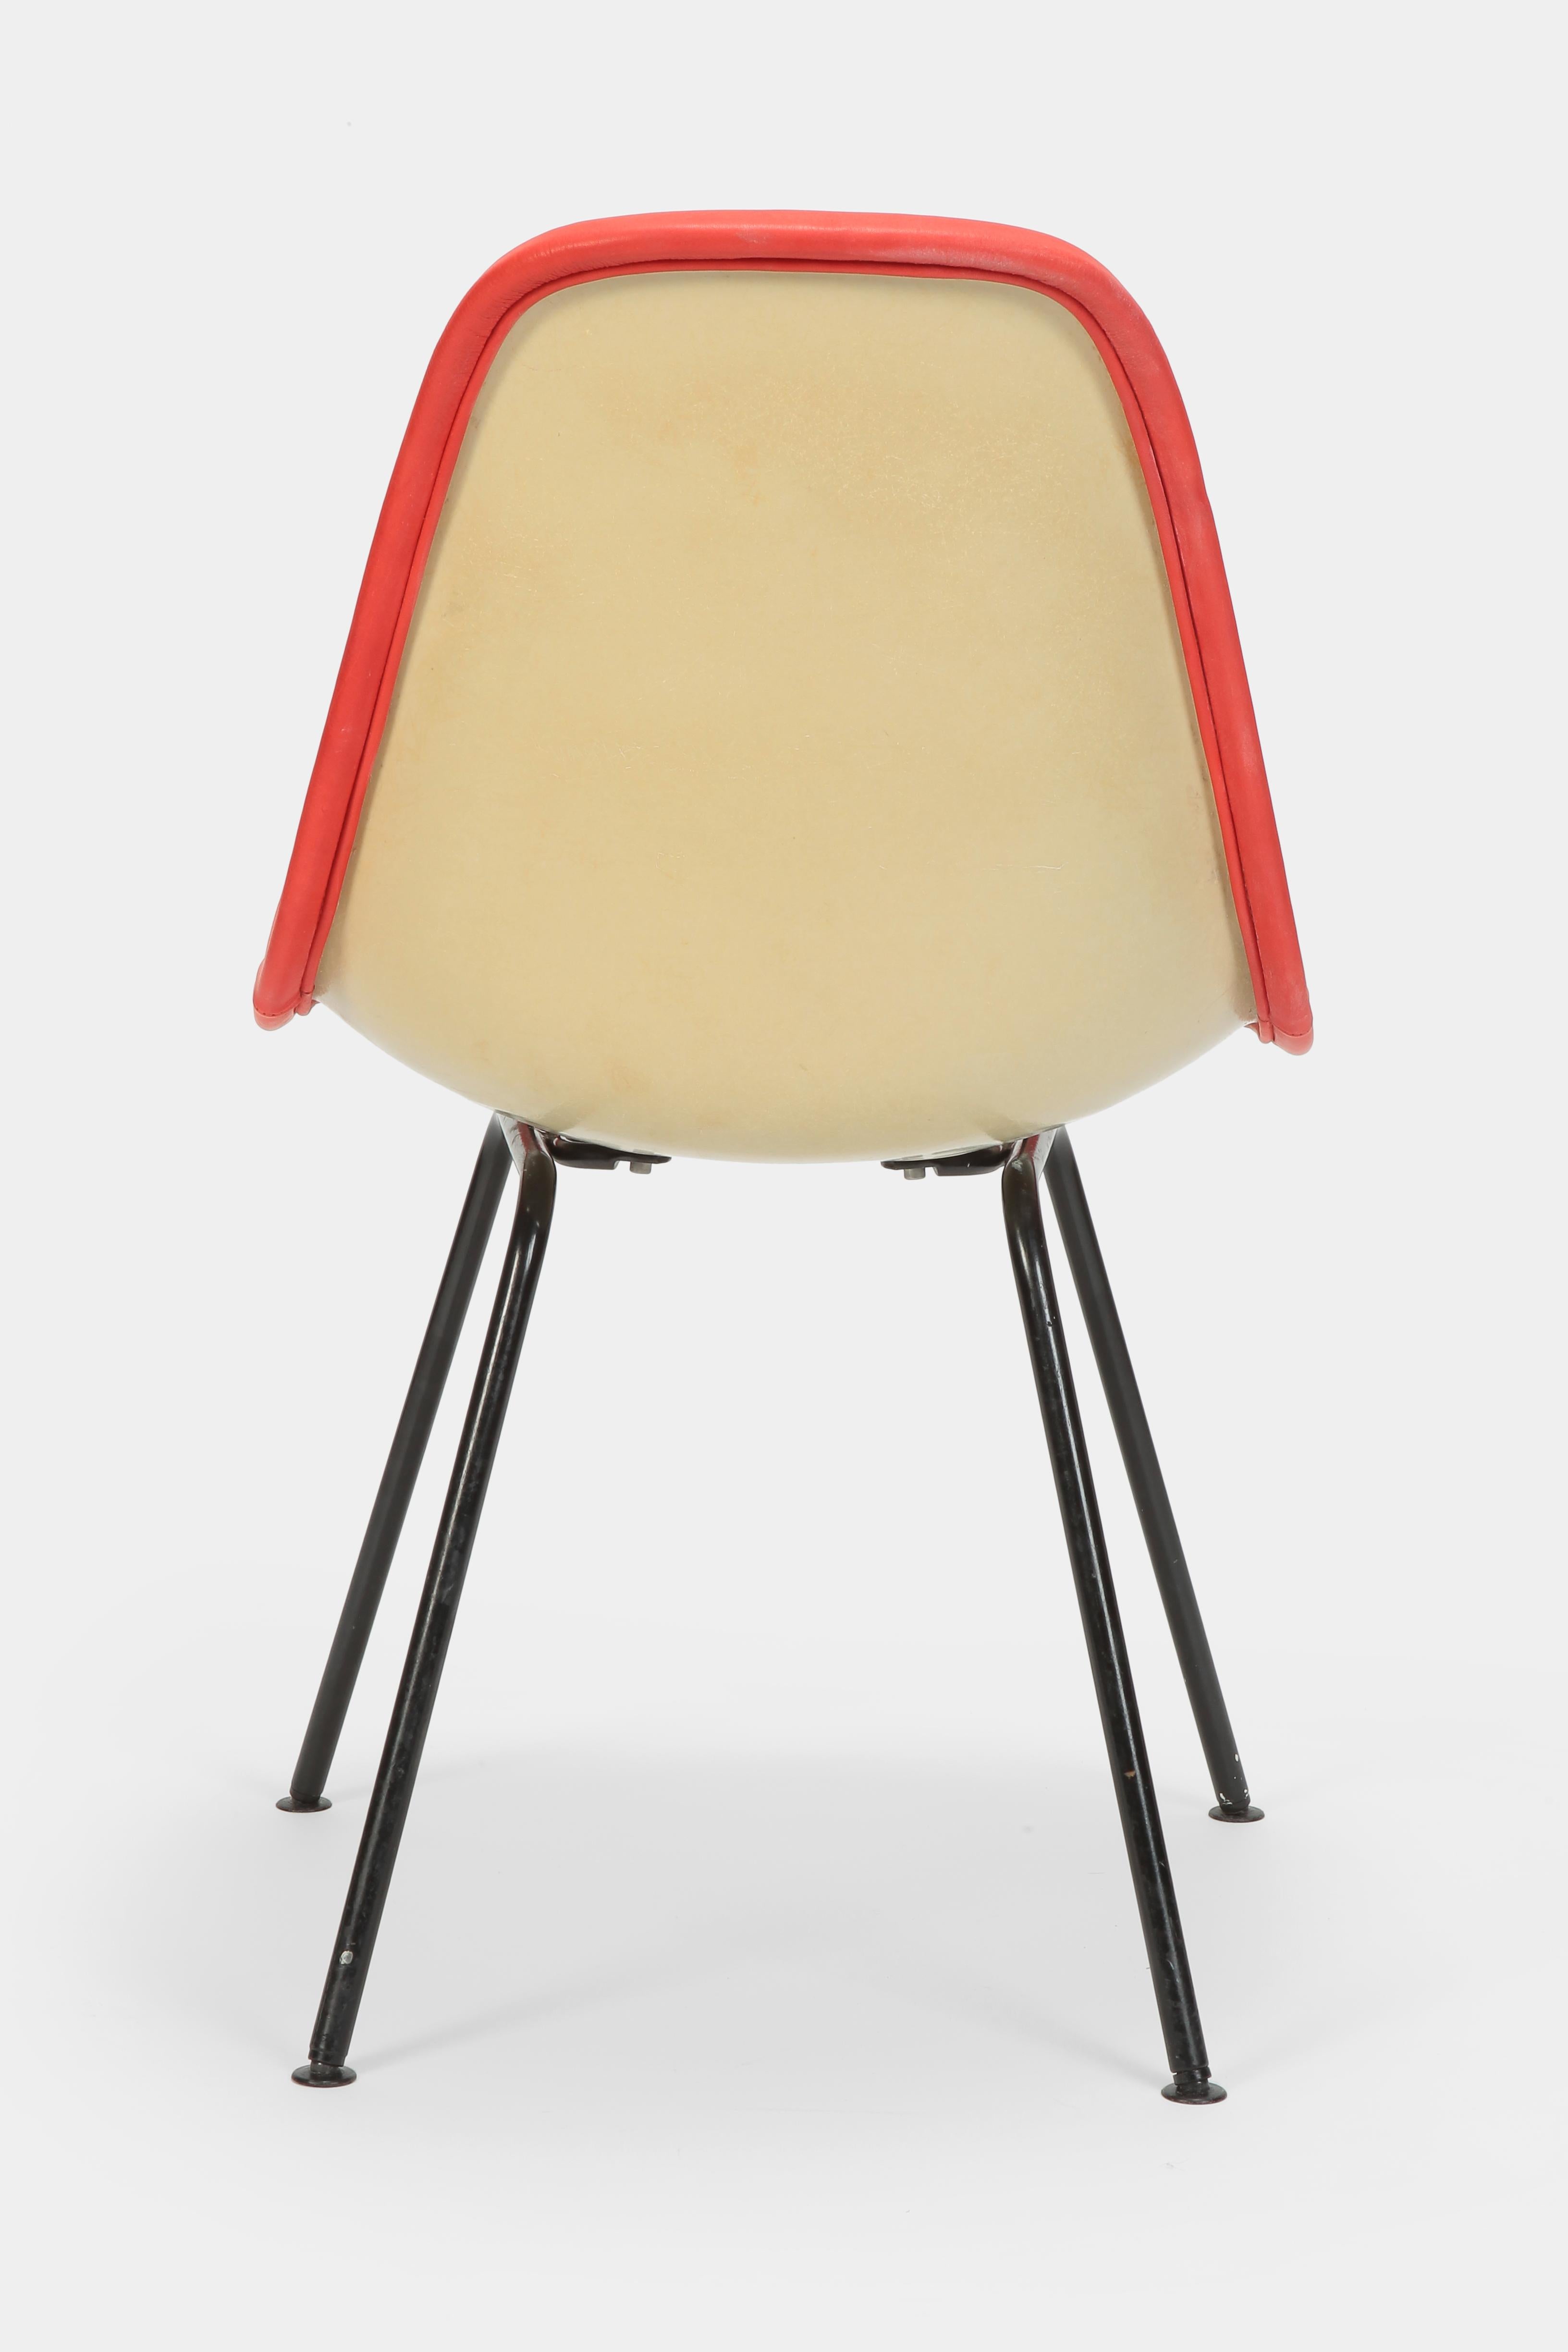 Mid-Century Modern Eames Side Chair Red Leather, 1960s For Sale